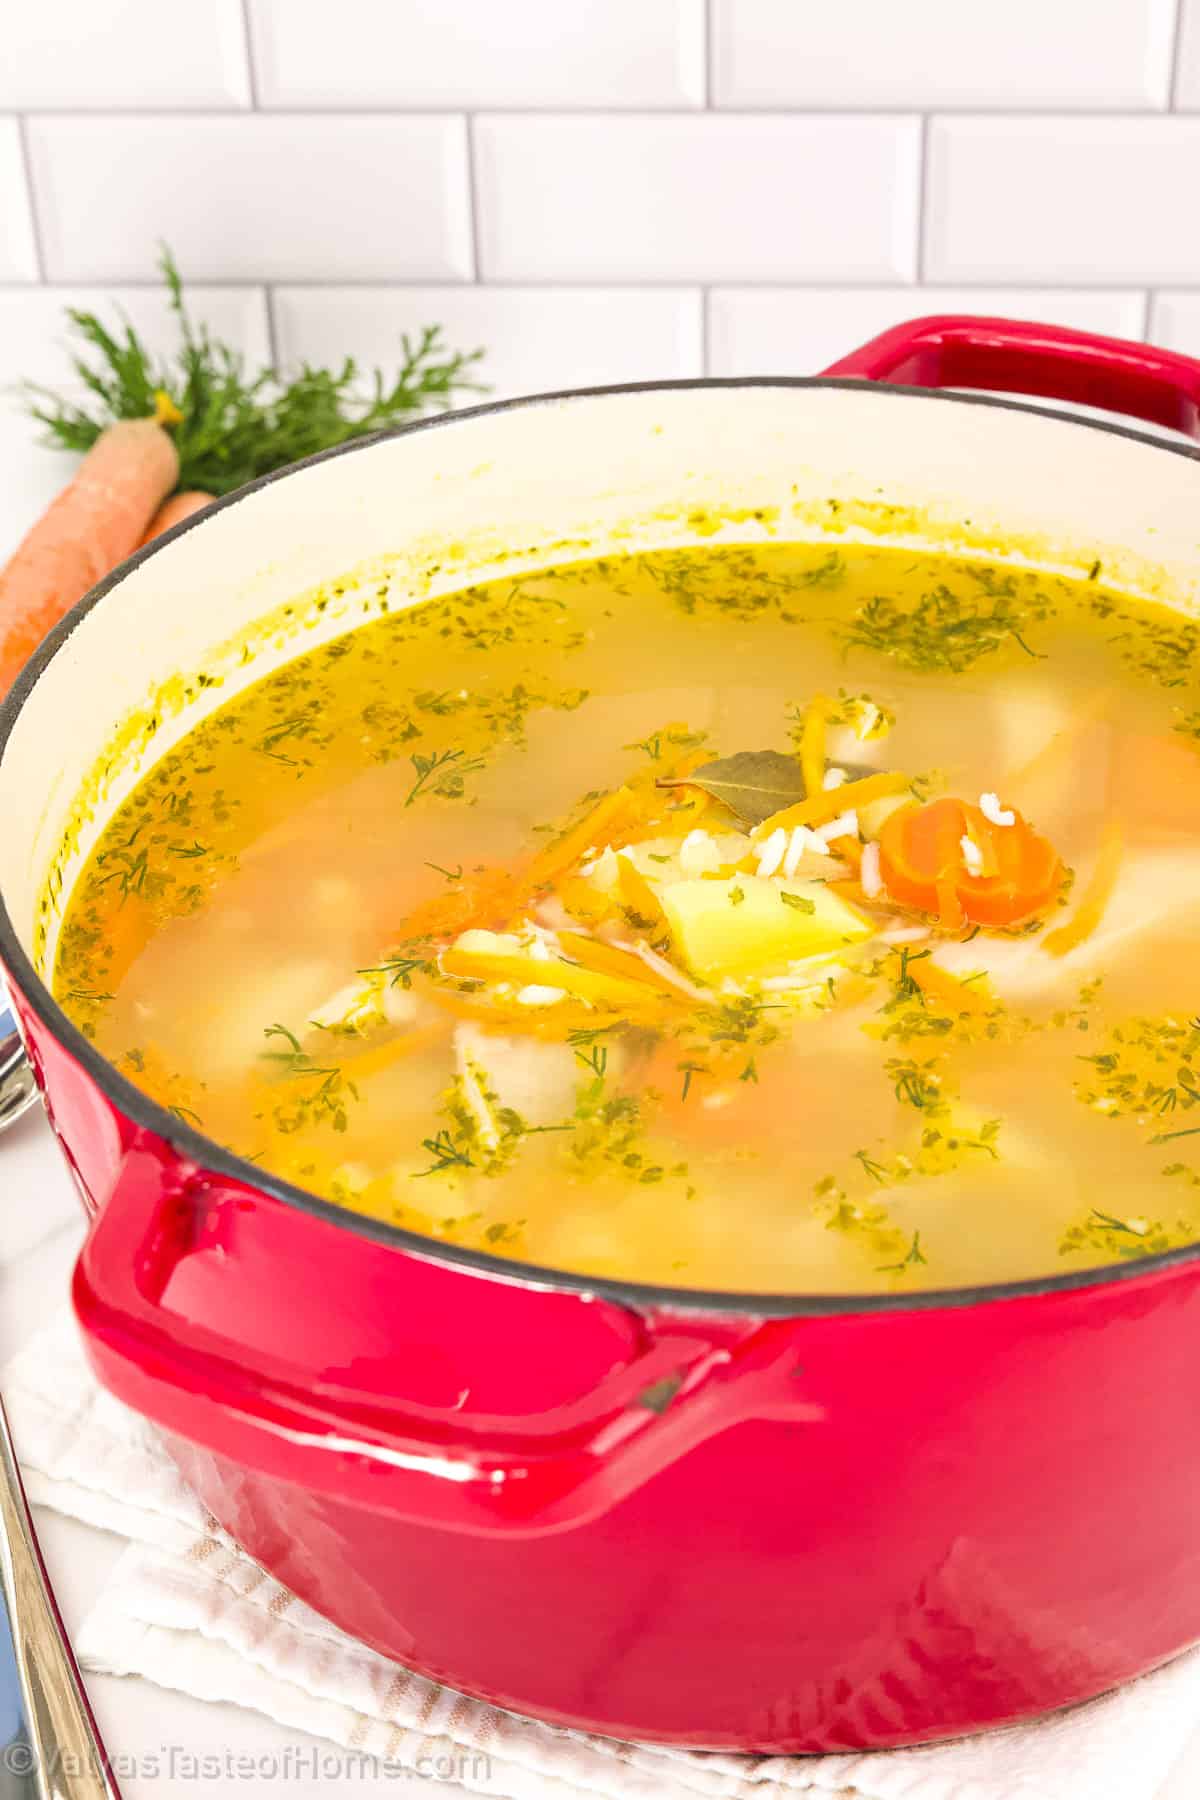 This soup is absolutely perfect with incredible flavors. You can easily store any leftovers you may have in the refrigerator in an airtight container.